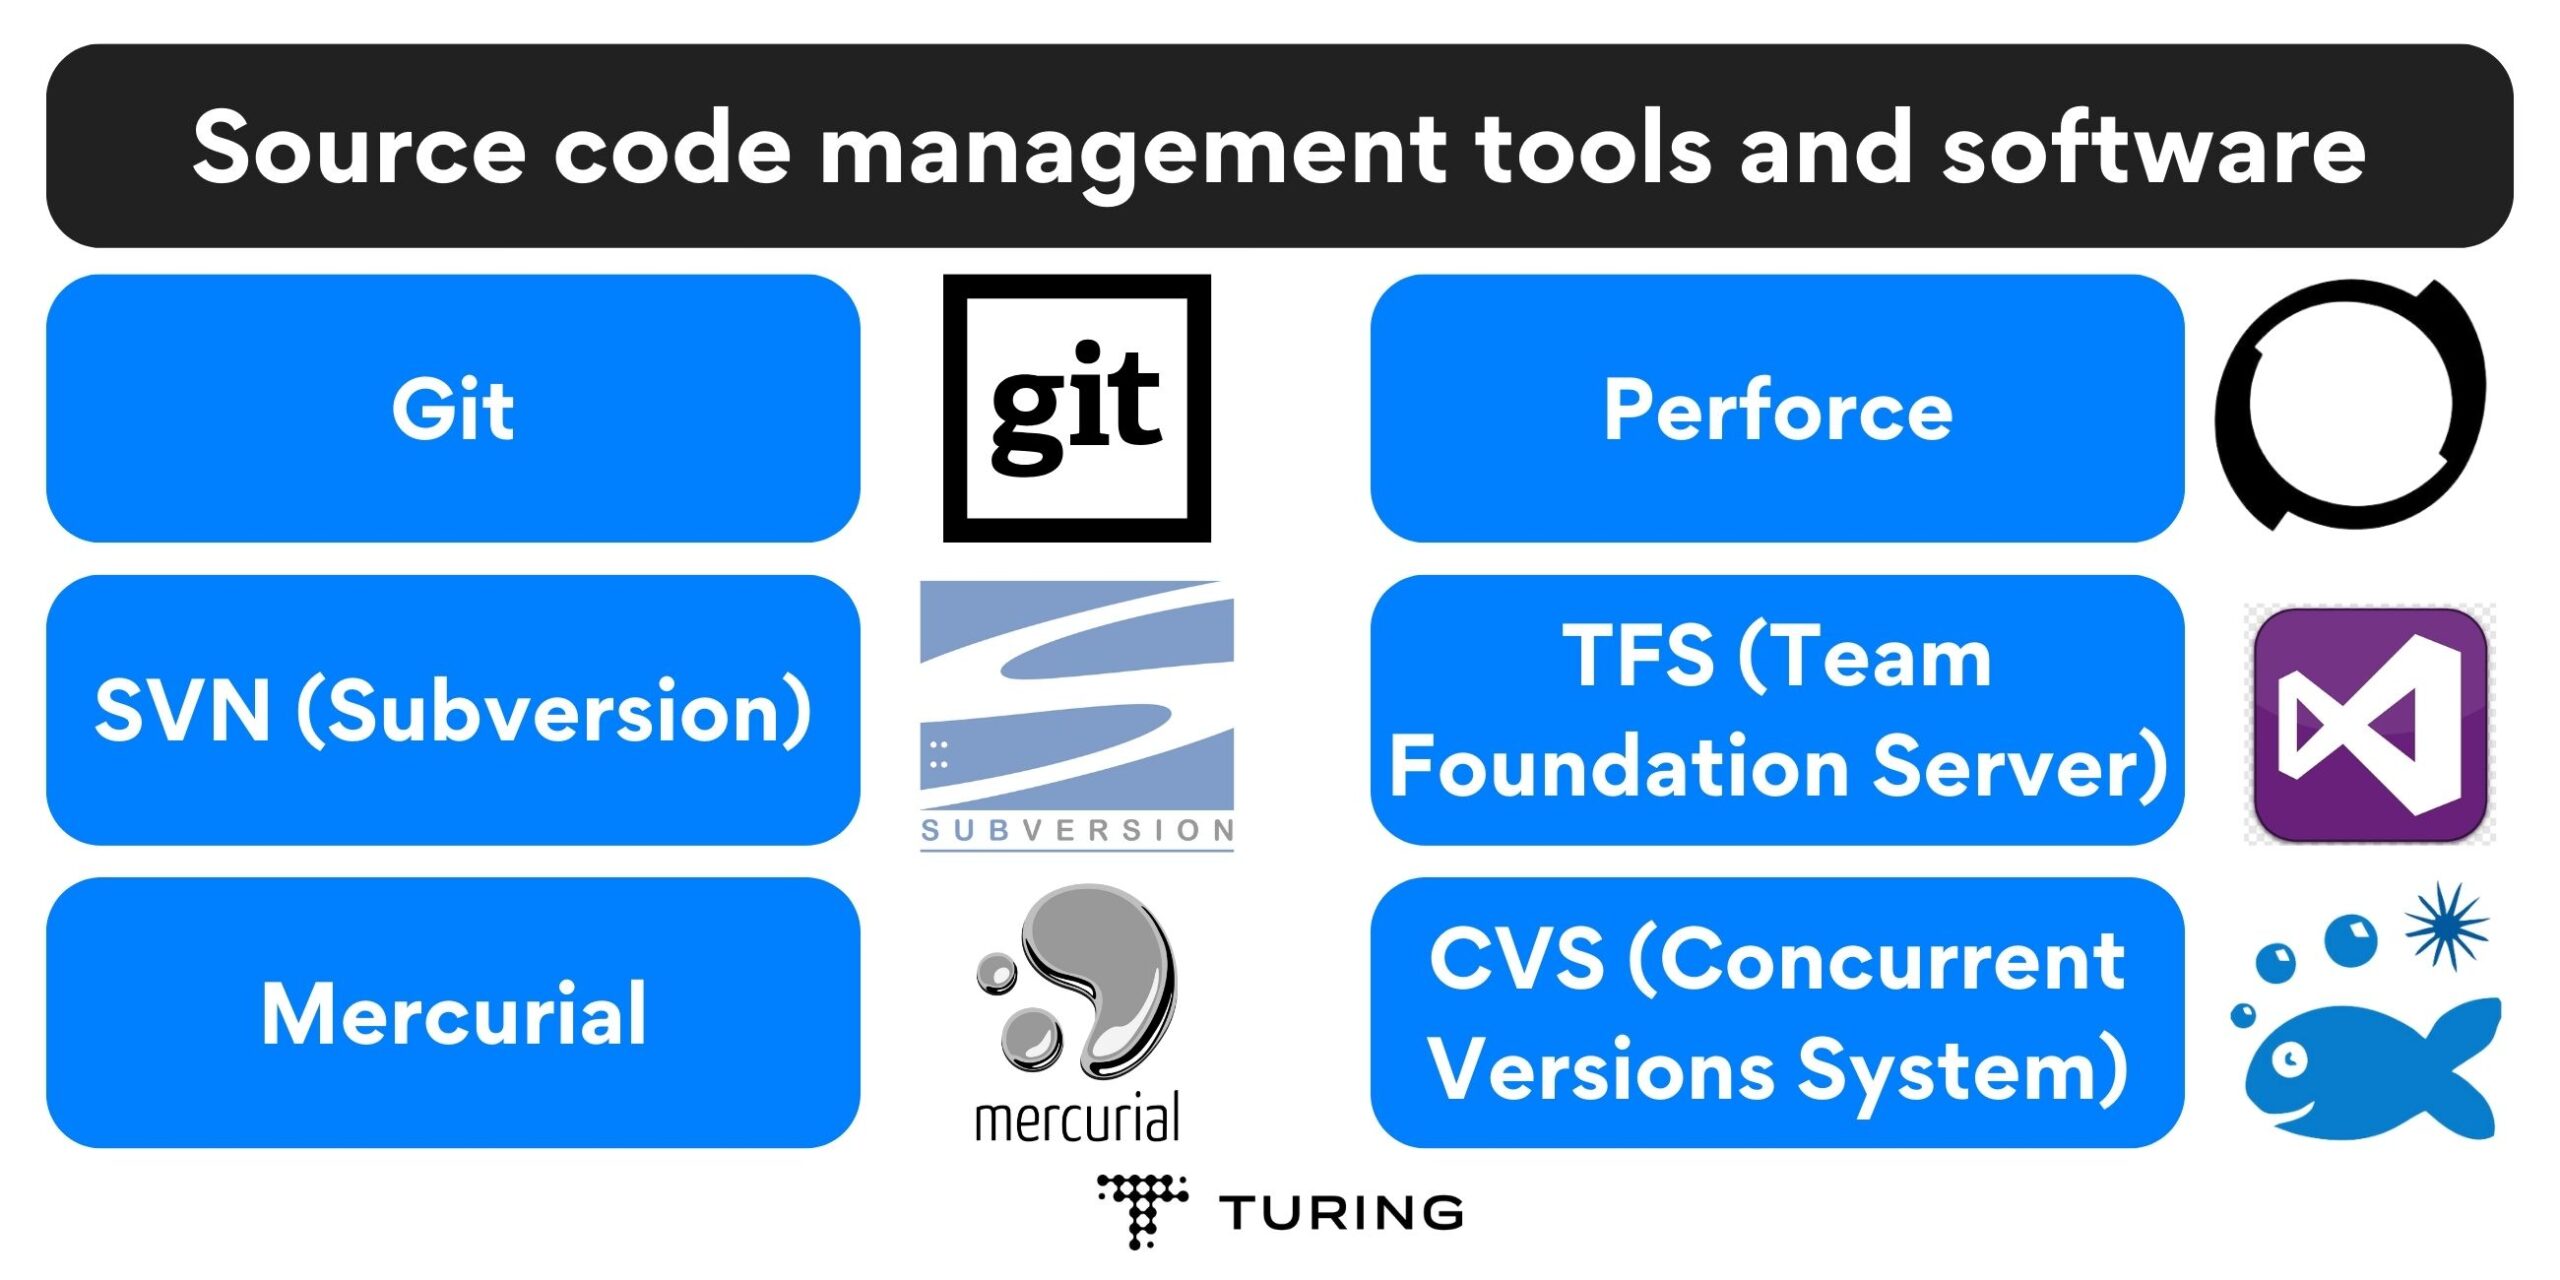 Source code management tools and software